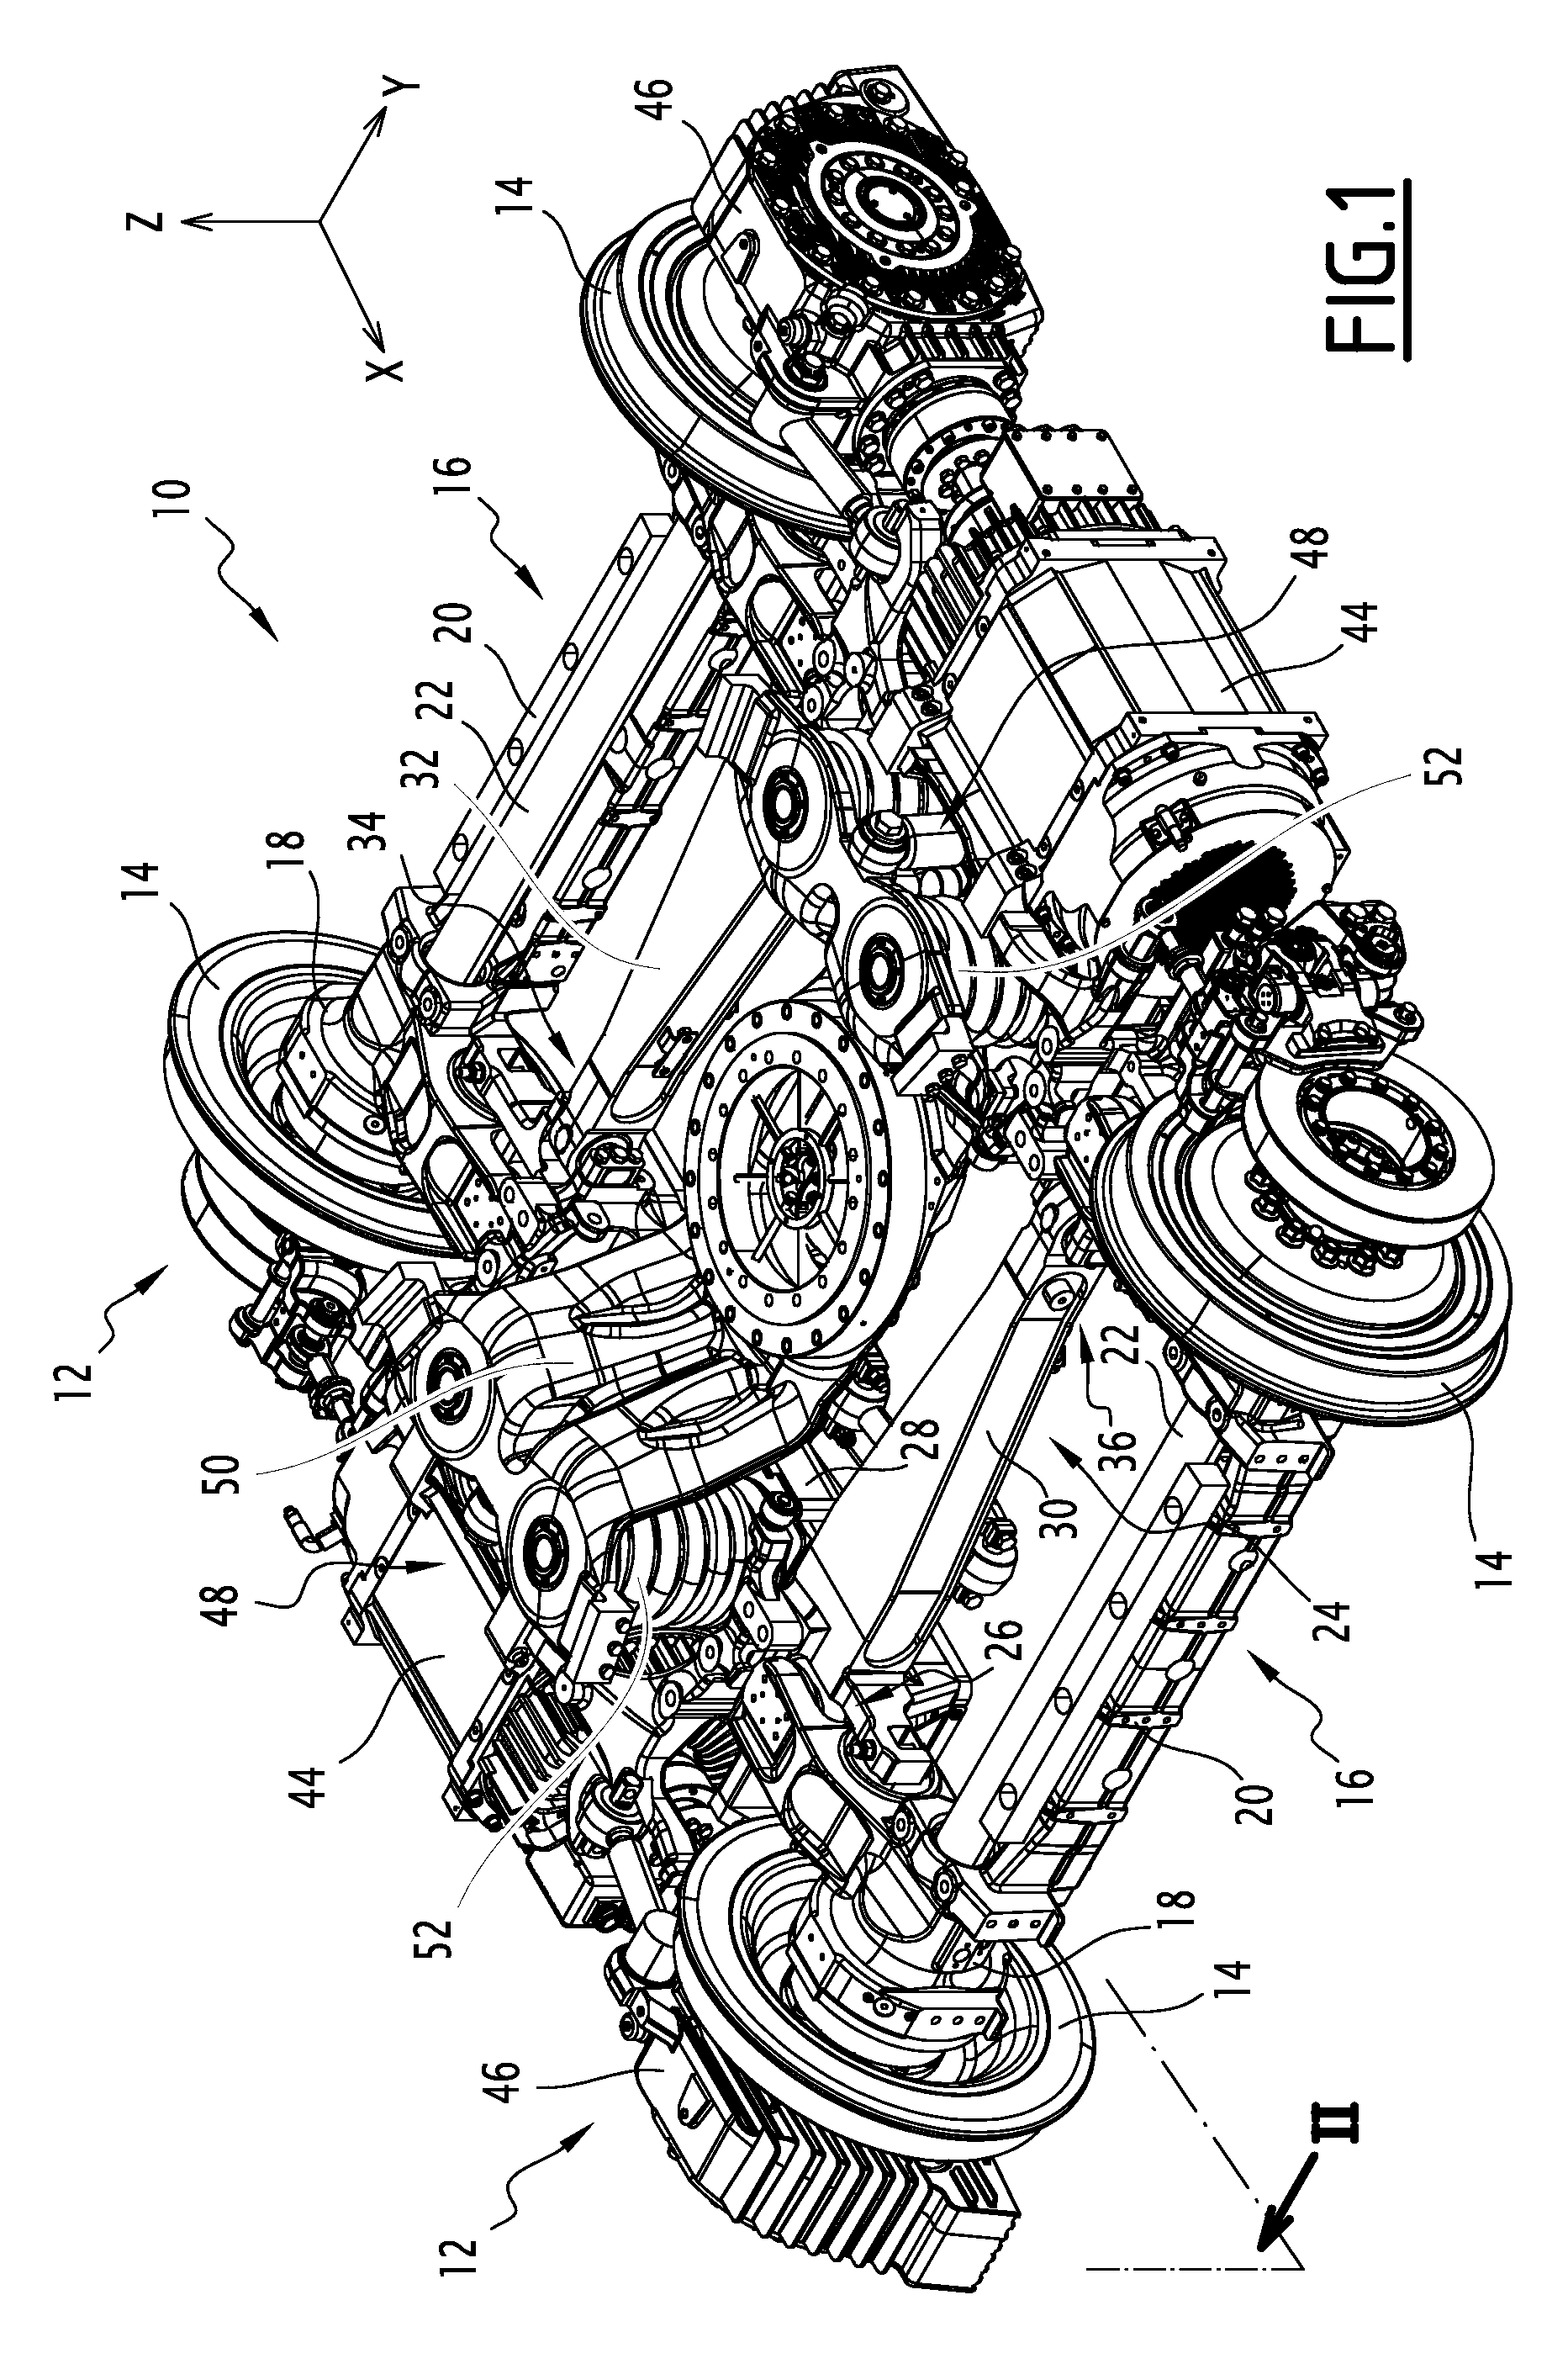 Bogie for railway vehicle with a suspension system